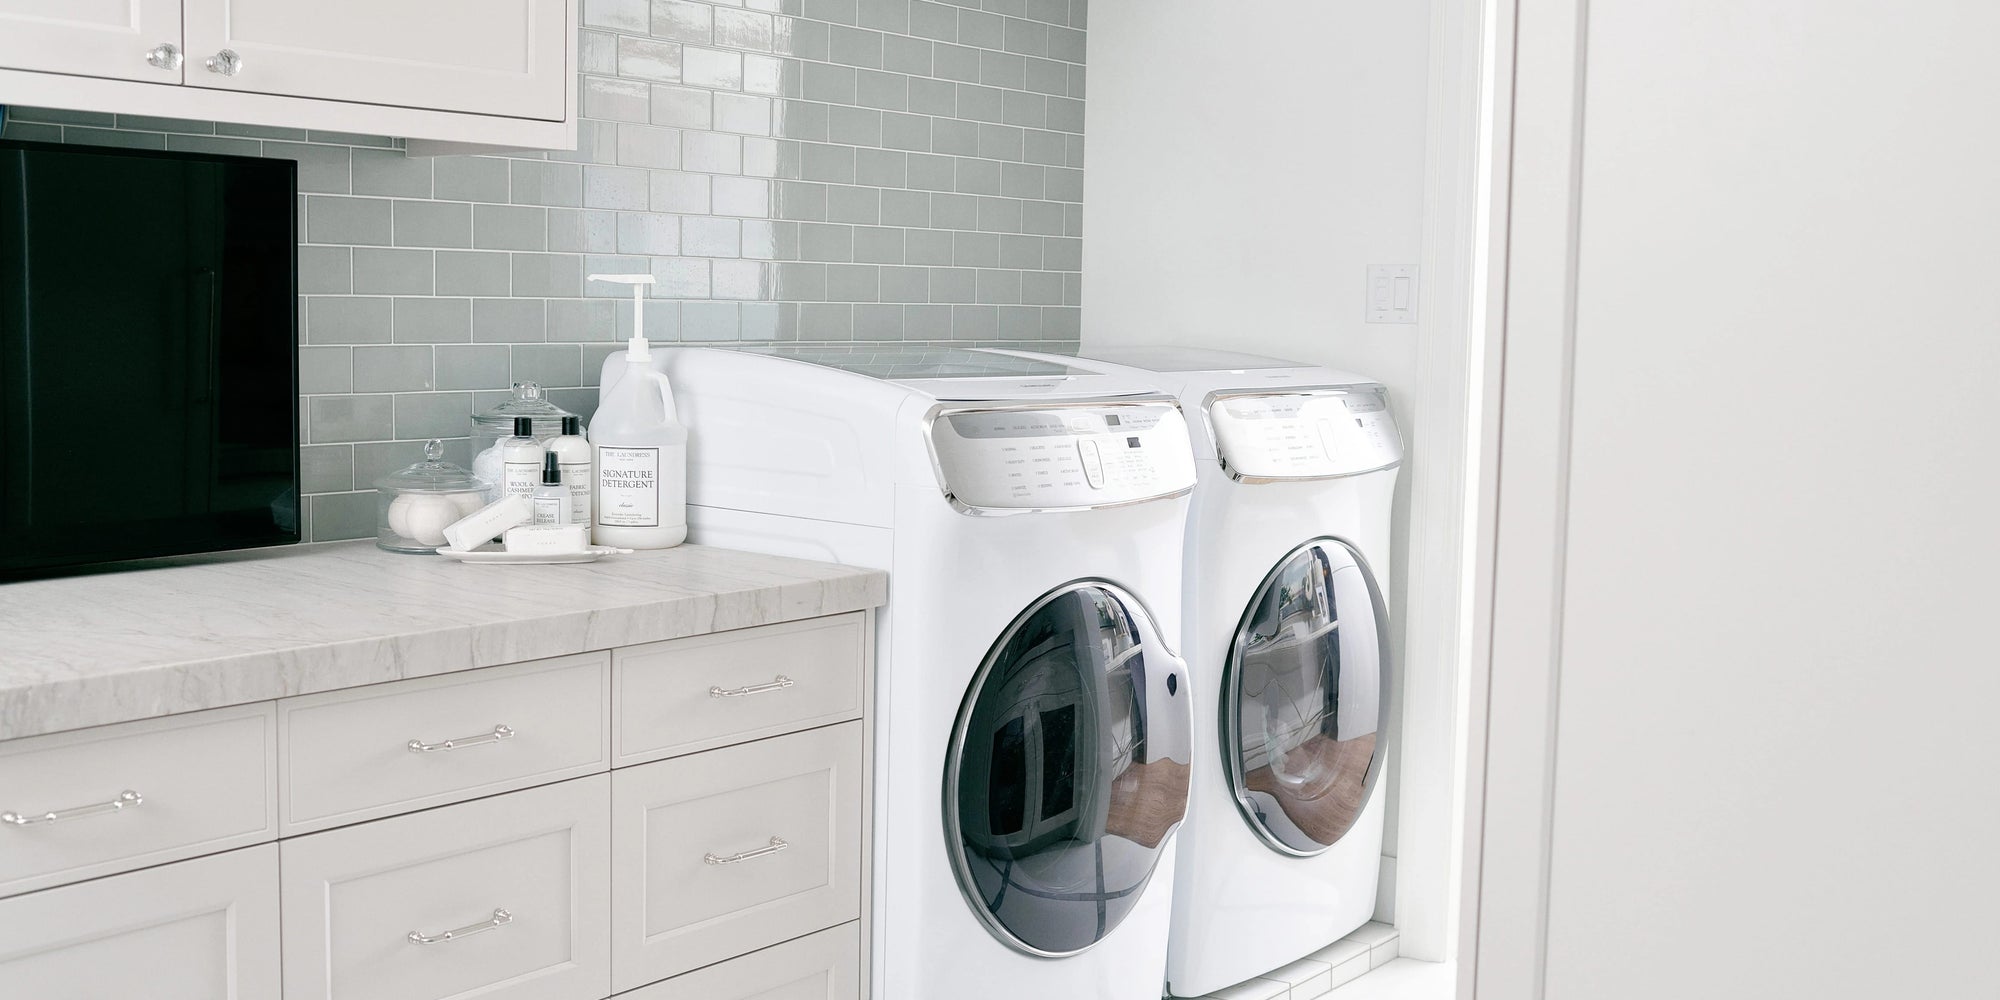 Transform Your Laundry Room in 4 Simple Steps